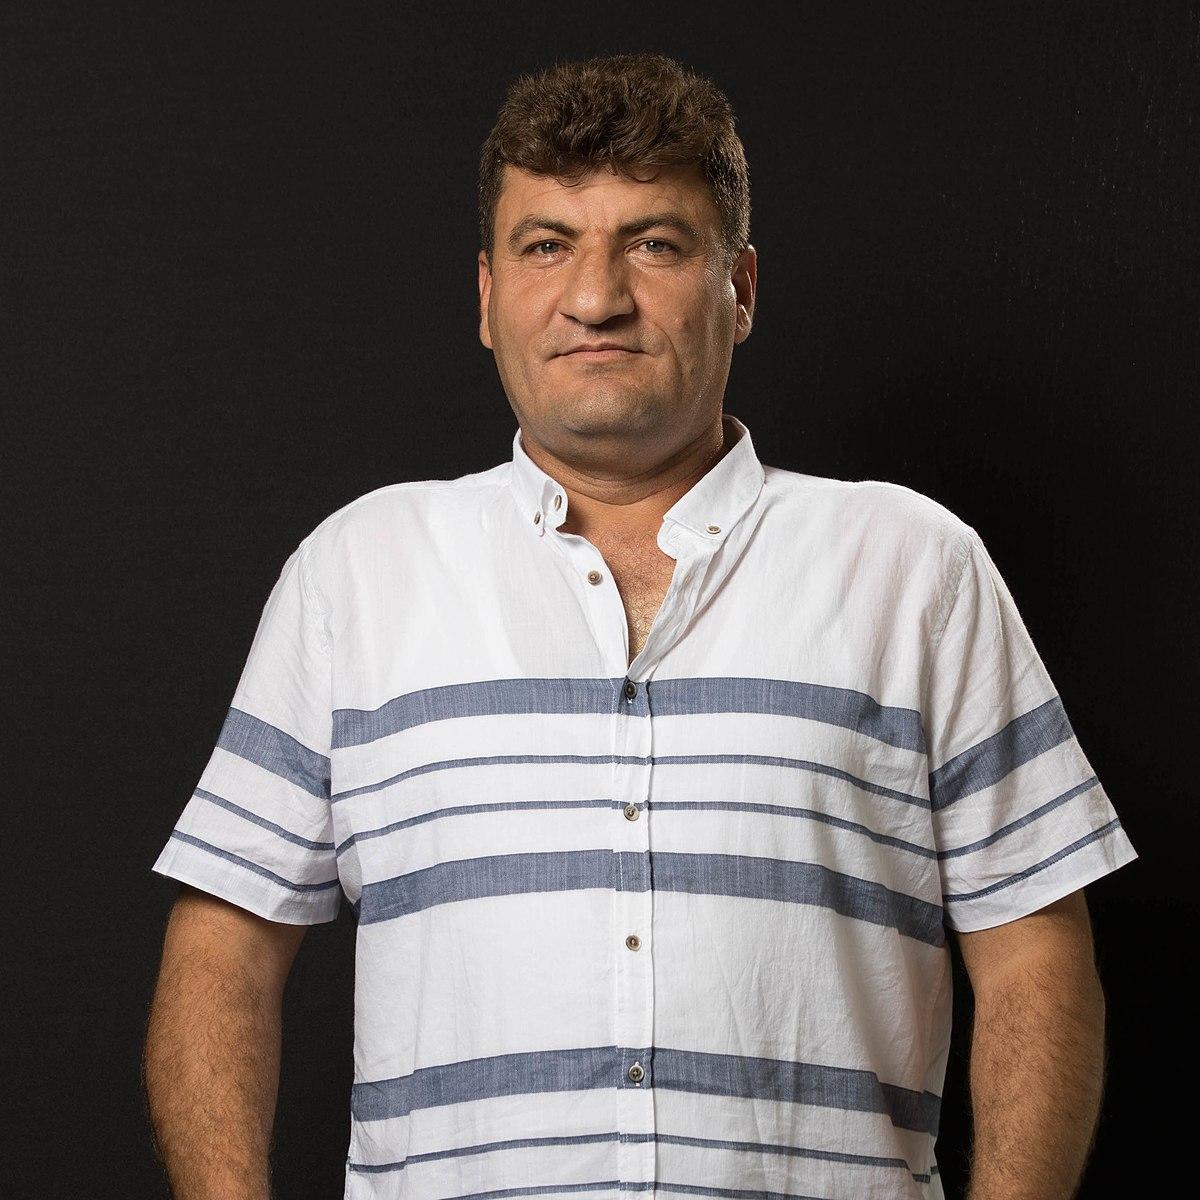 Raed Fares in front of a black background